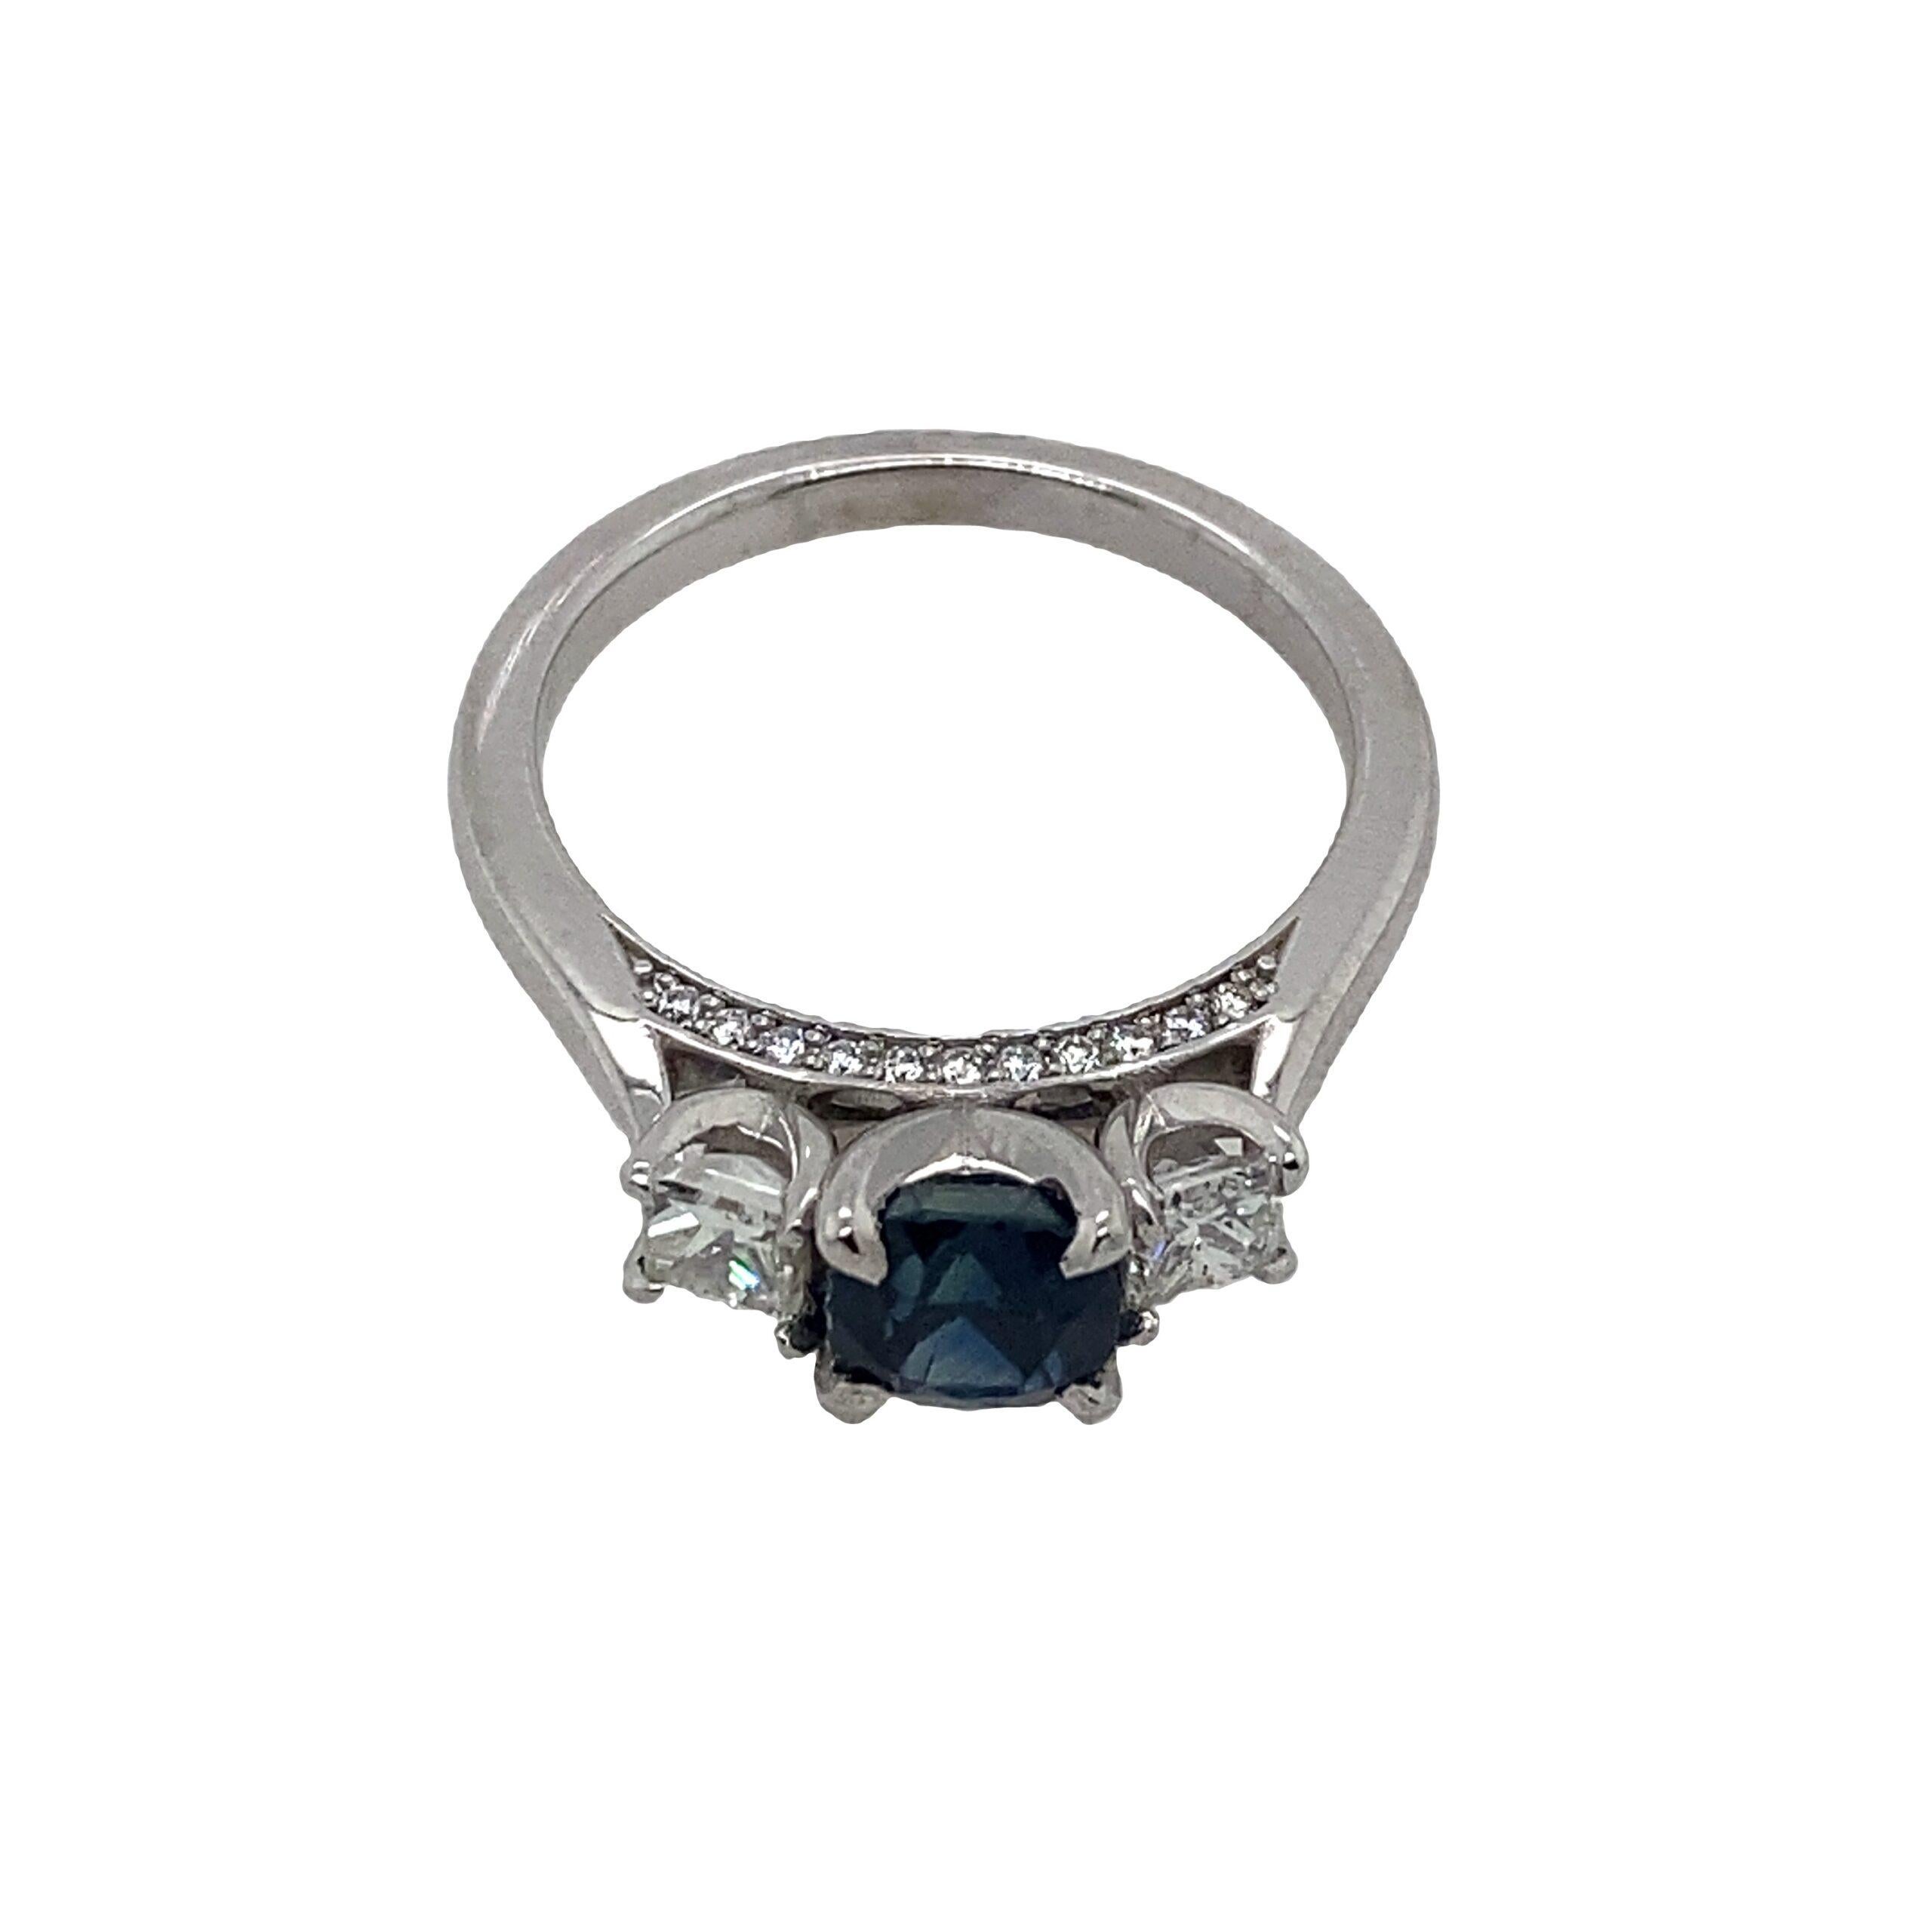 Natural Cushion Shape 1.12ct Sapphire and 0.52ct Diamond Ring Set in Platinum

Natural Cushion Shape Sapphire and Diamond Ring  Set in Platinum. With two 0.22ct Princess Cut Diamonds on each side. With 11 Diamonds on each side

Additional